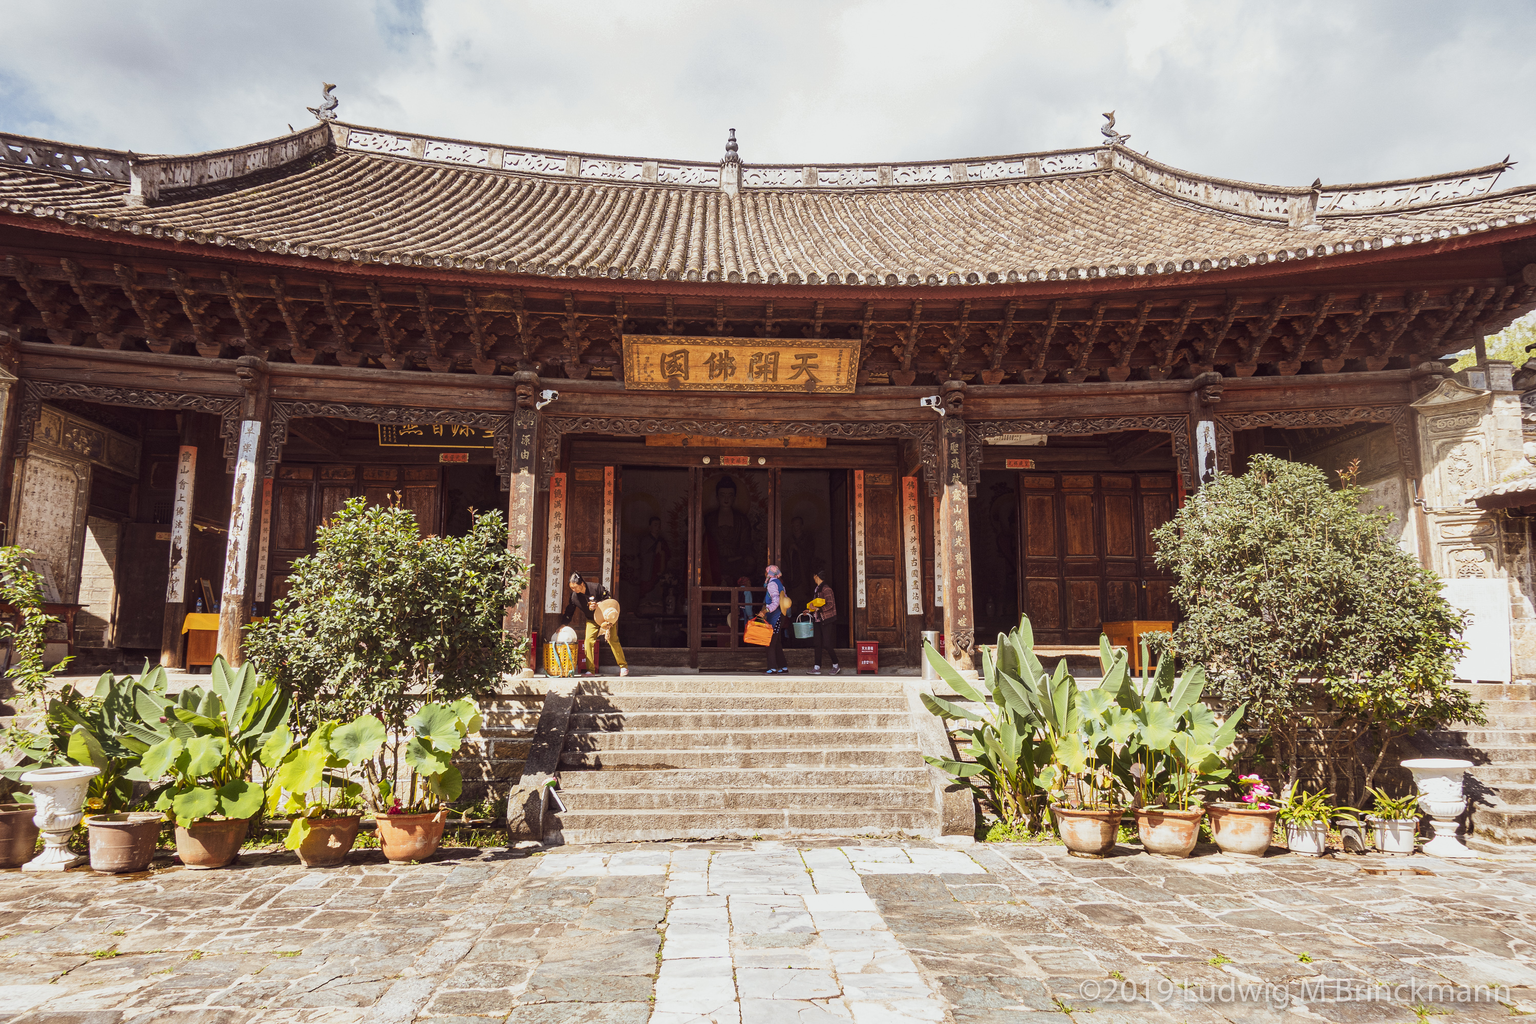 Picture: Buddhist temple that is part of the Qingdong temple complex.